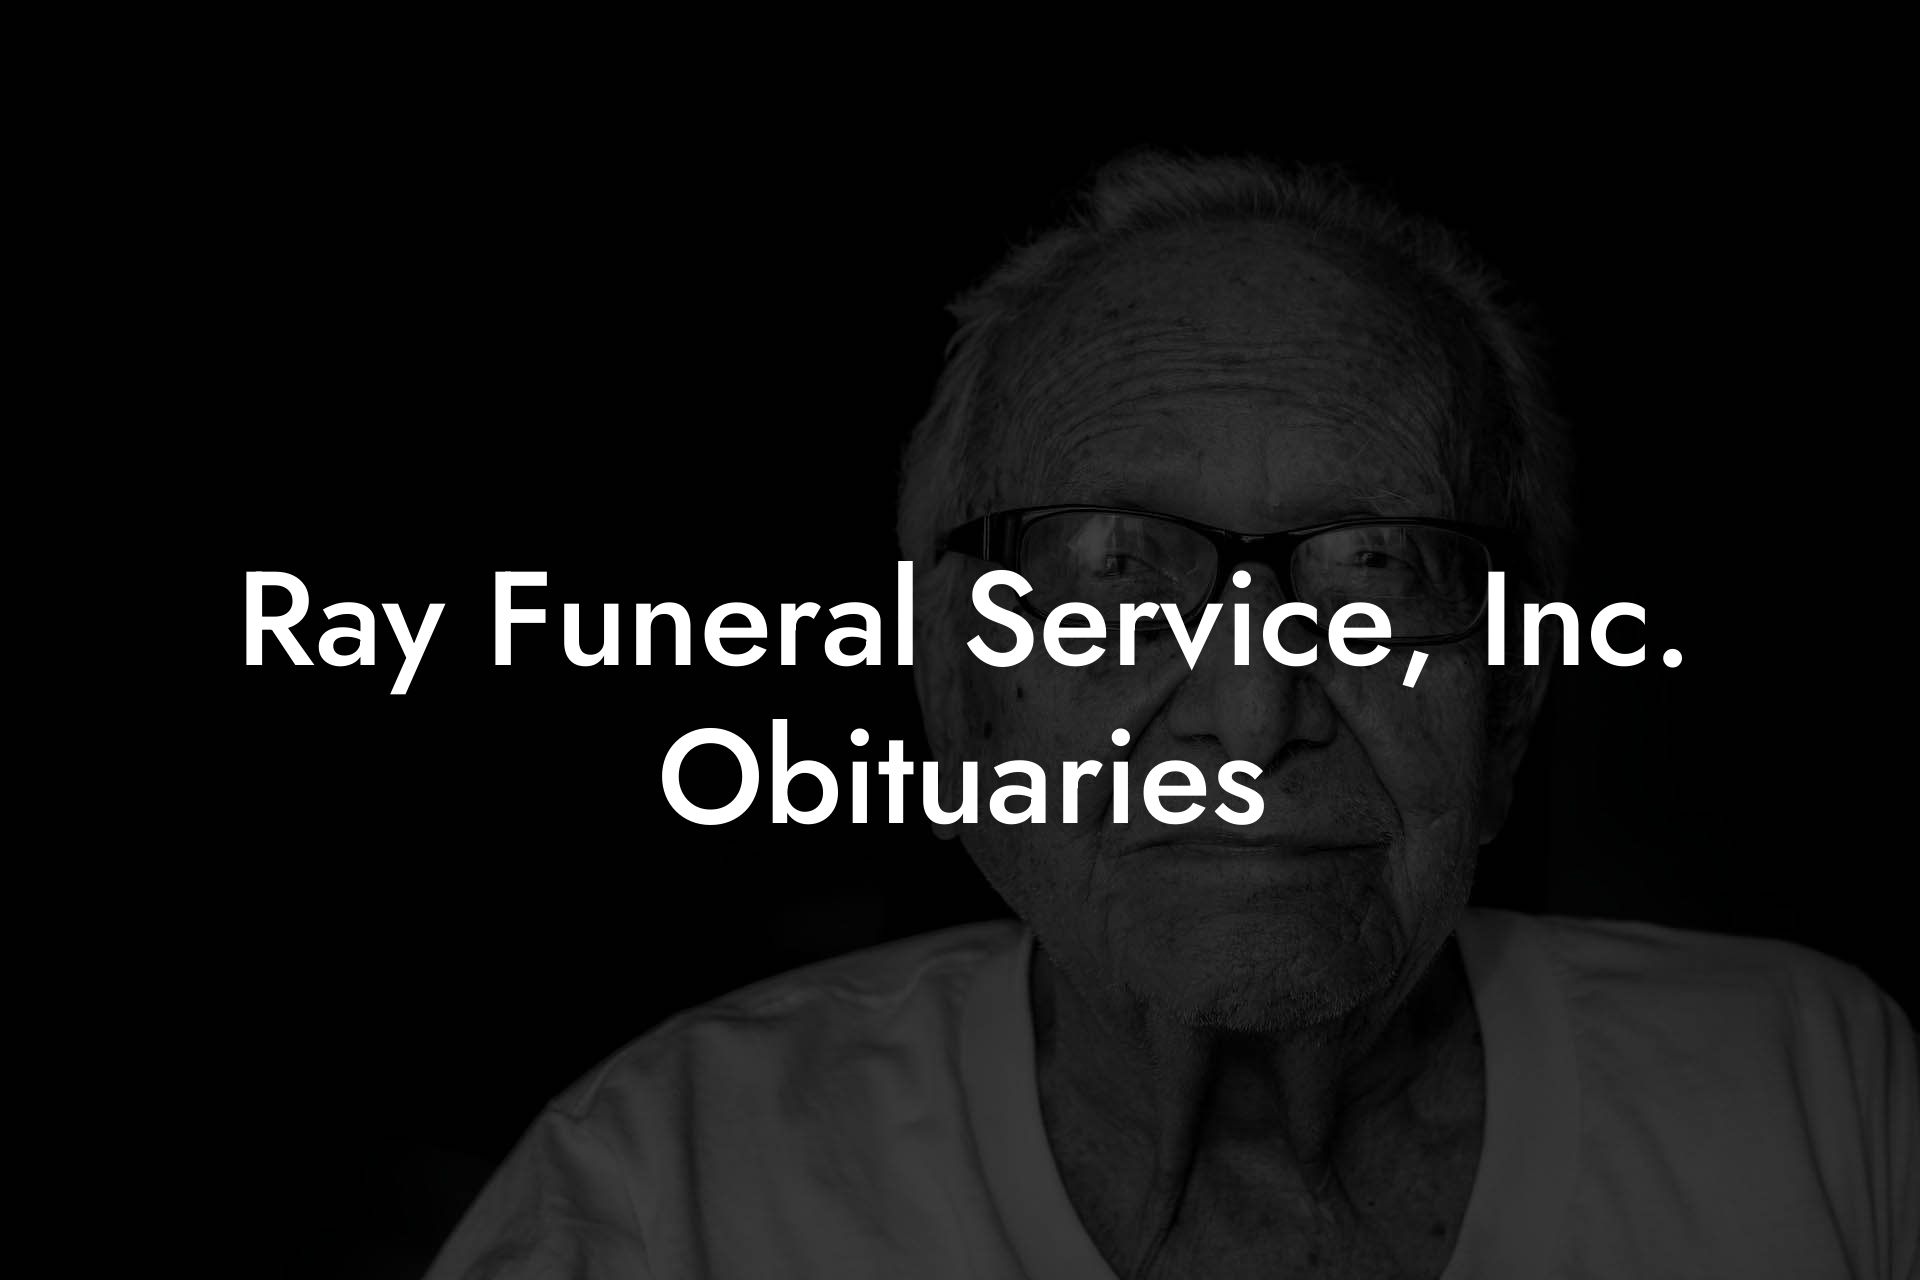 Ray Funeral Service, Inc. Obituaries